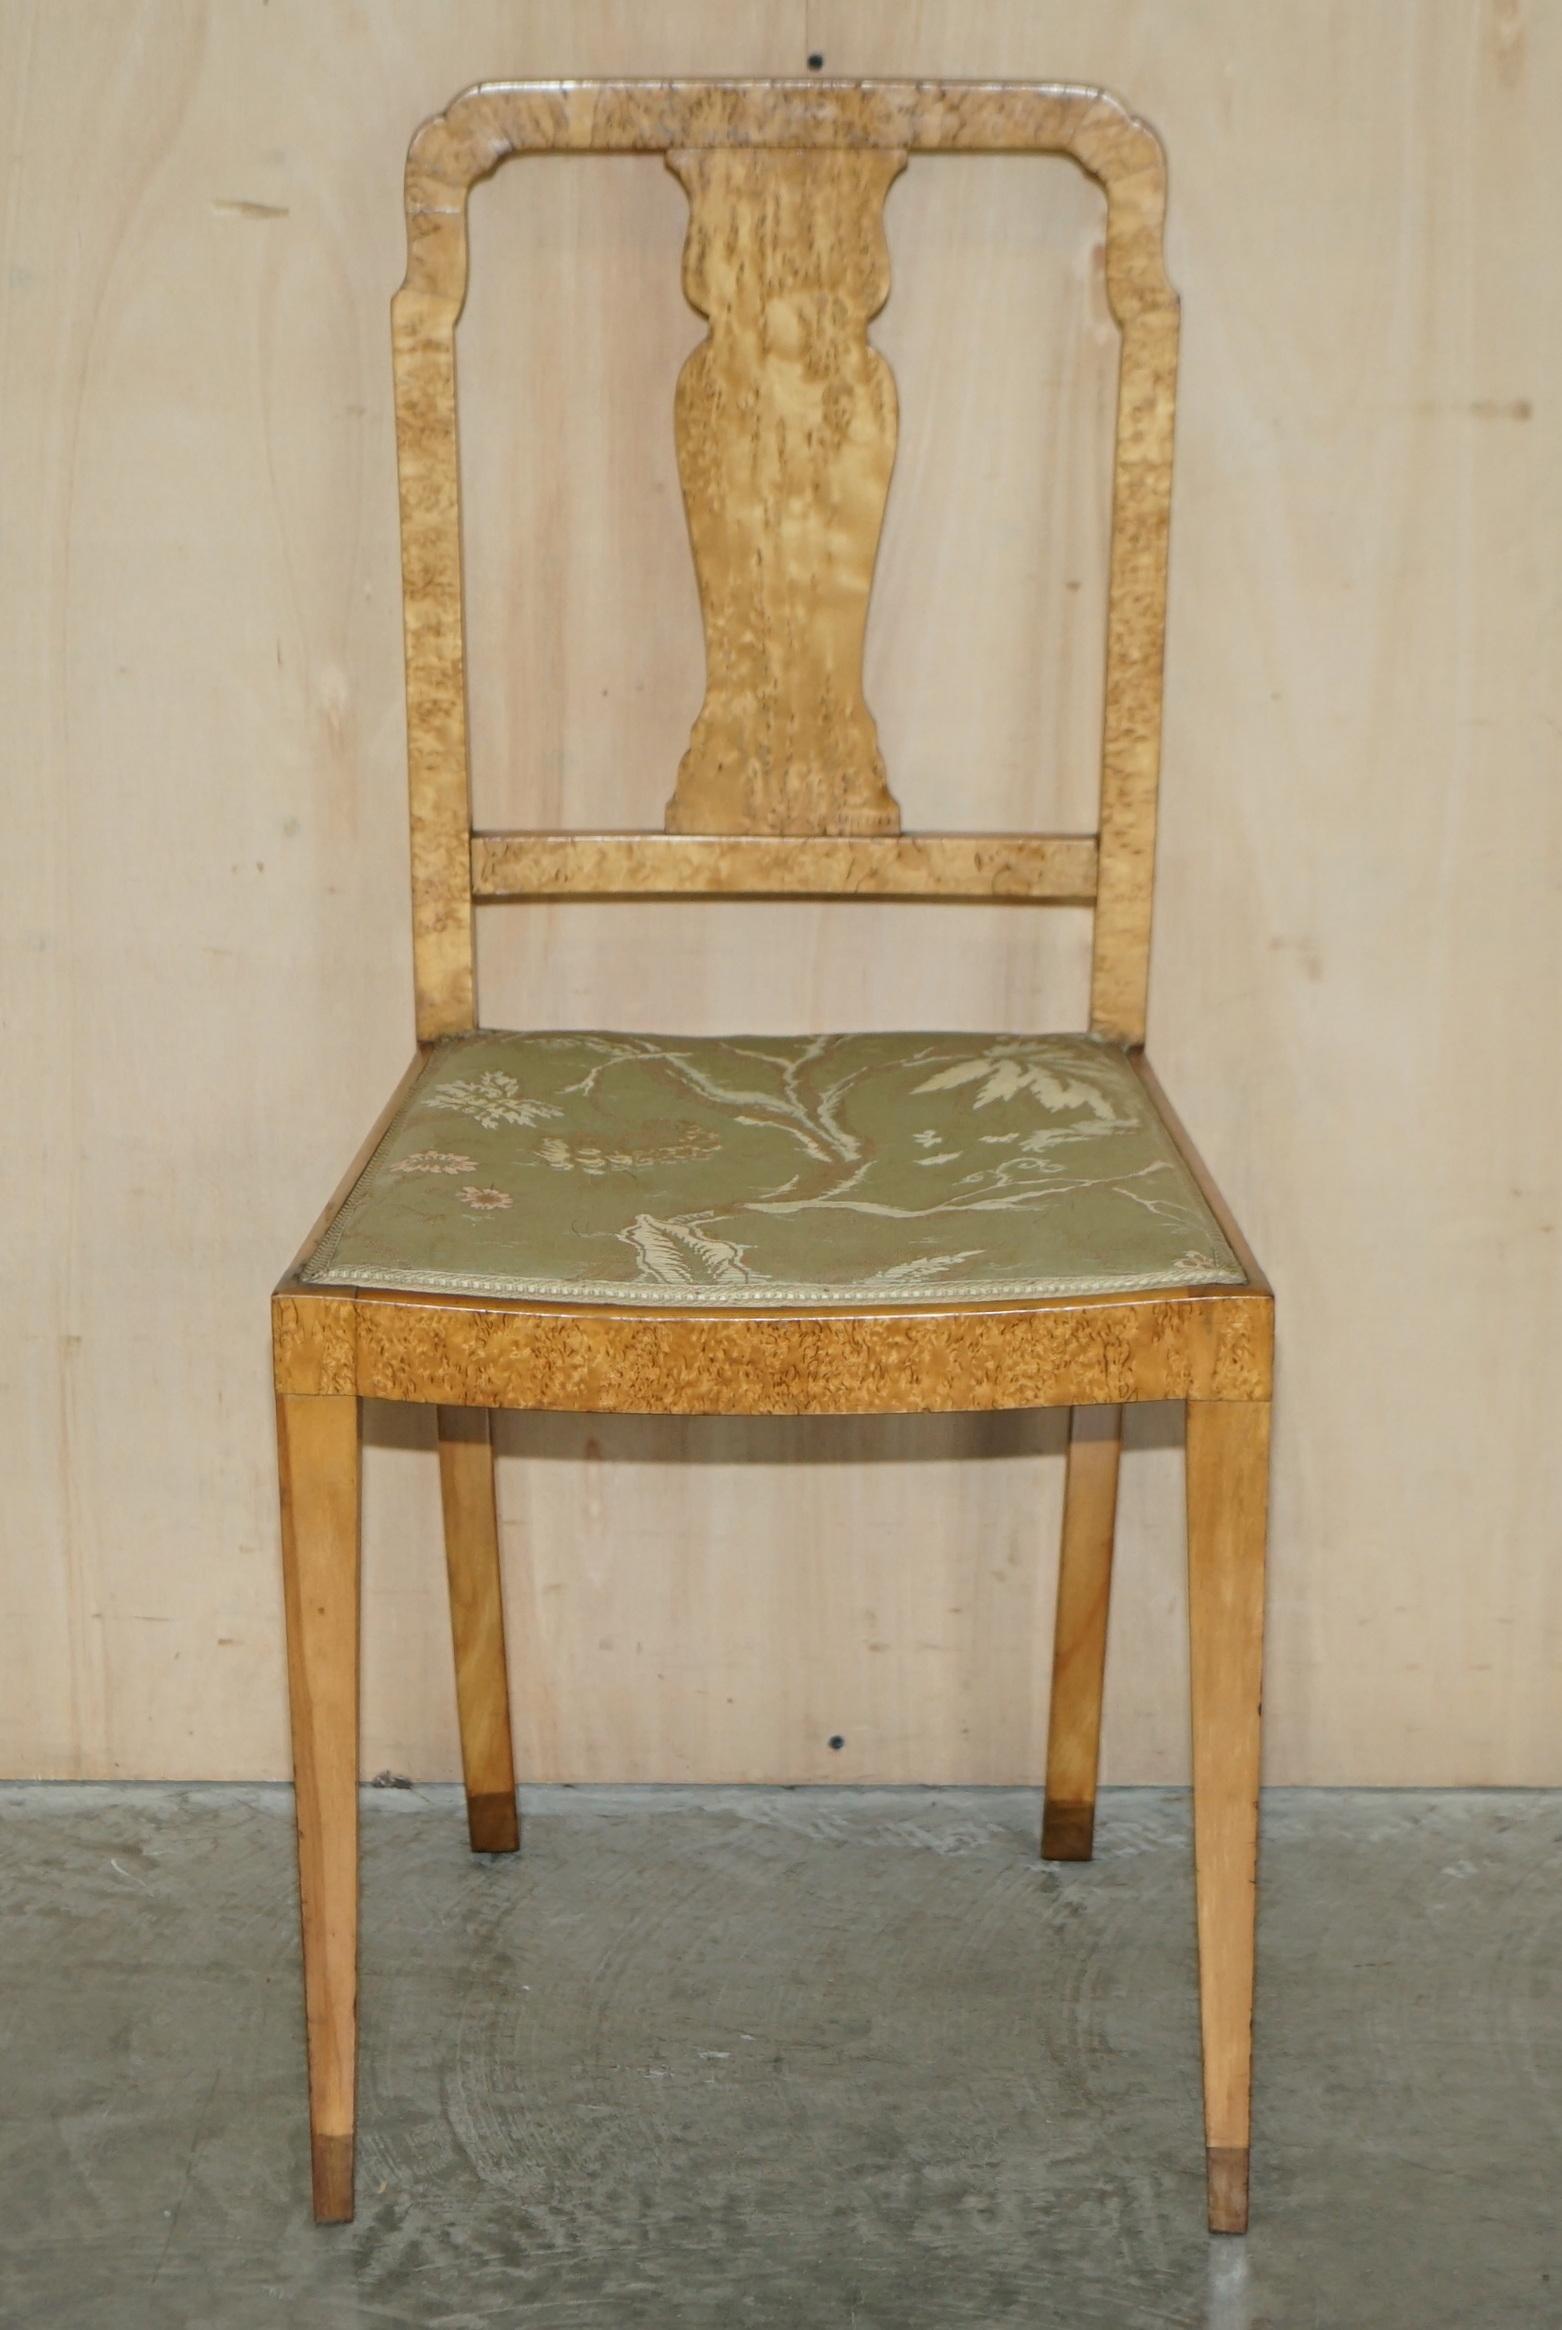 We are delighted to offer for sale this stunning original Art Deco Burr Maple side chair which is part of a large suite.

This is part of a suite, in total I have a side chair, dressing table stool, side cupboard, large double wardrobe, pair of